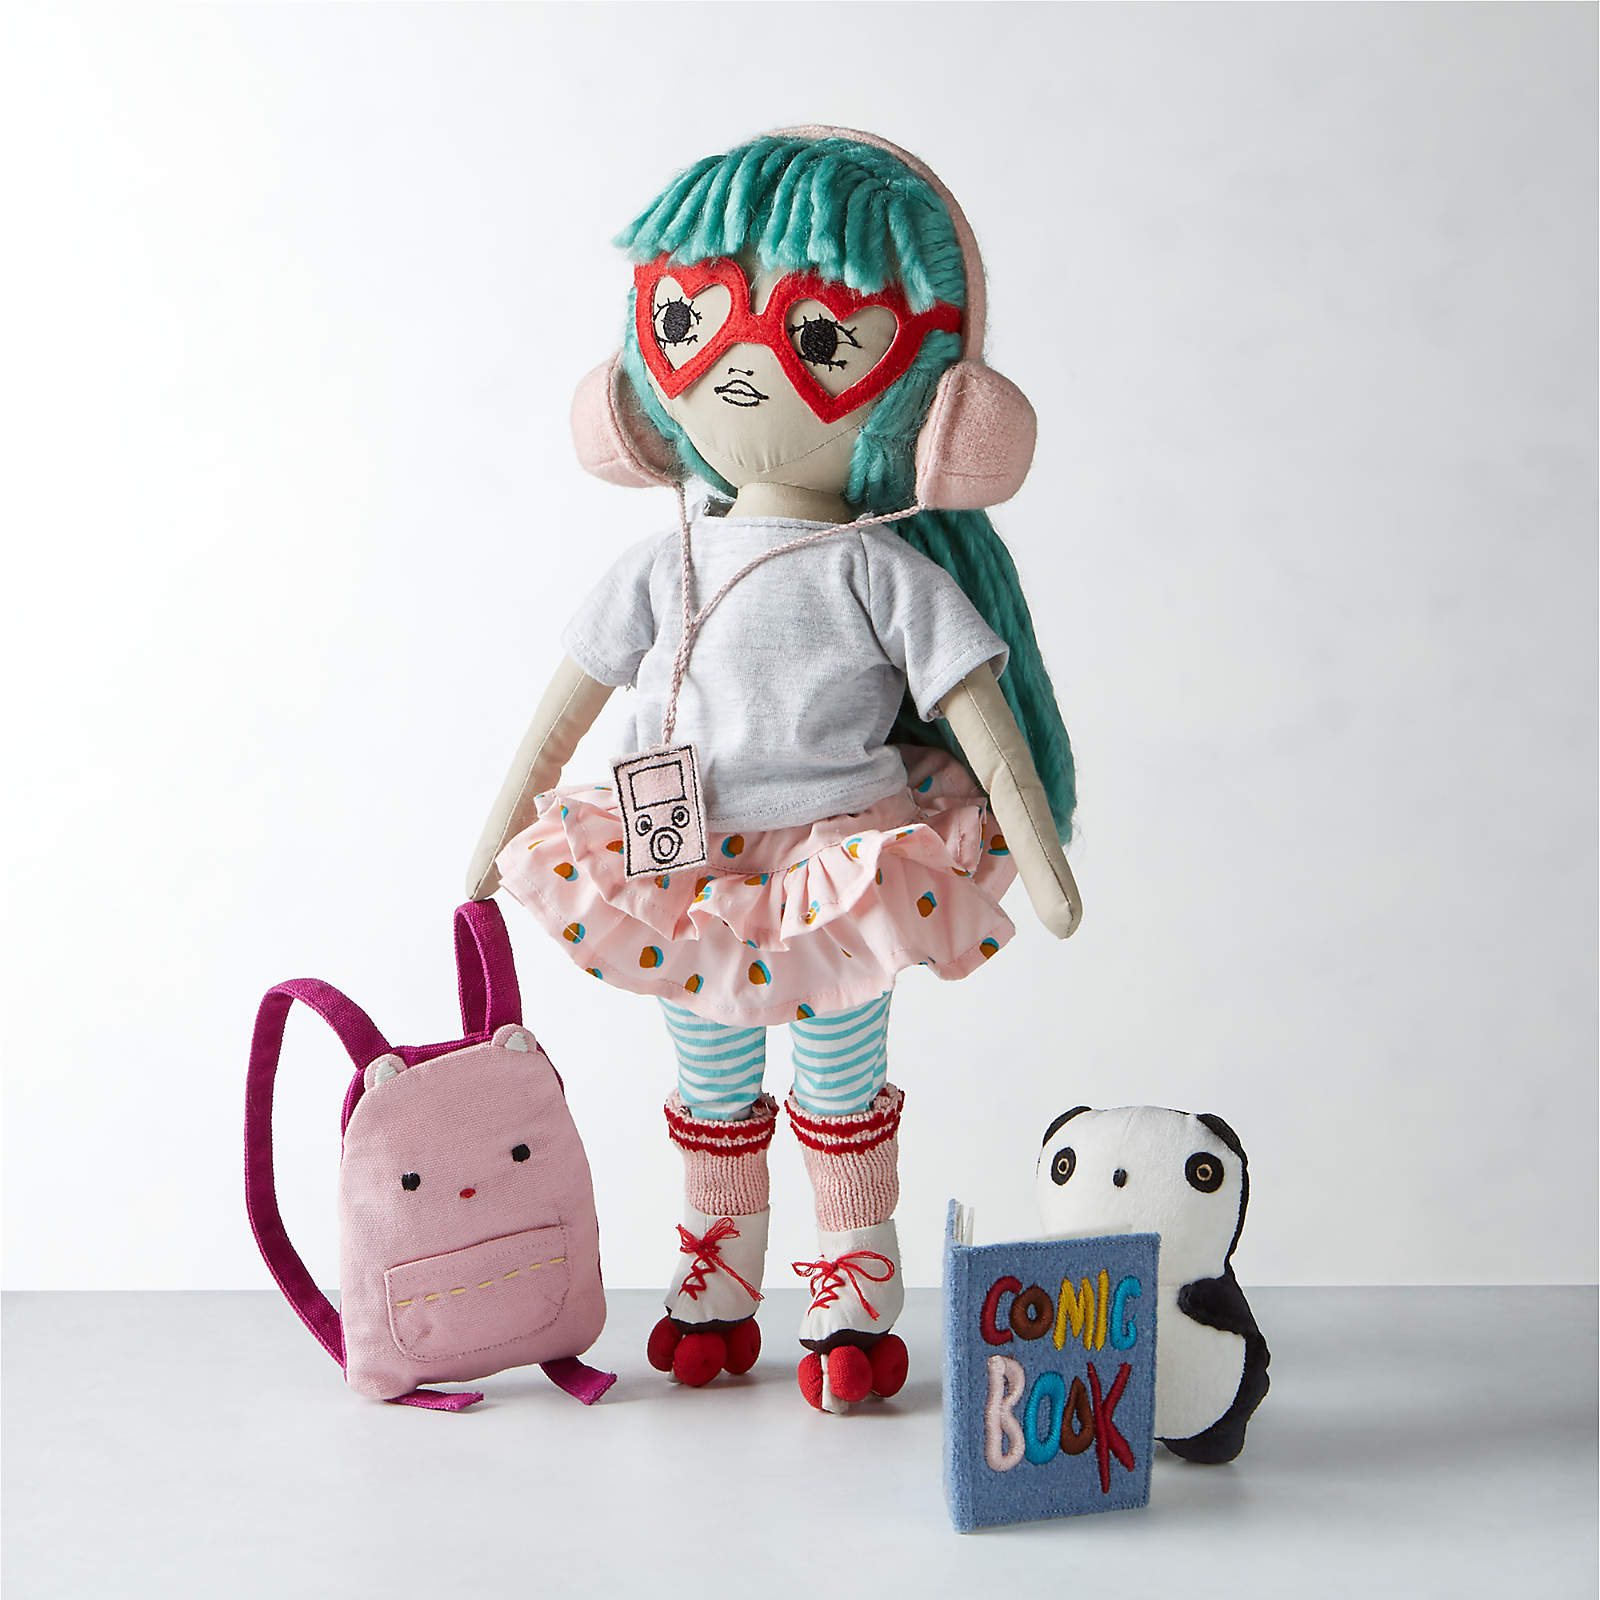 soft doll with glasses